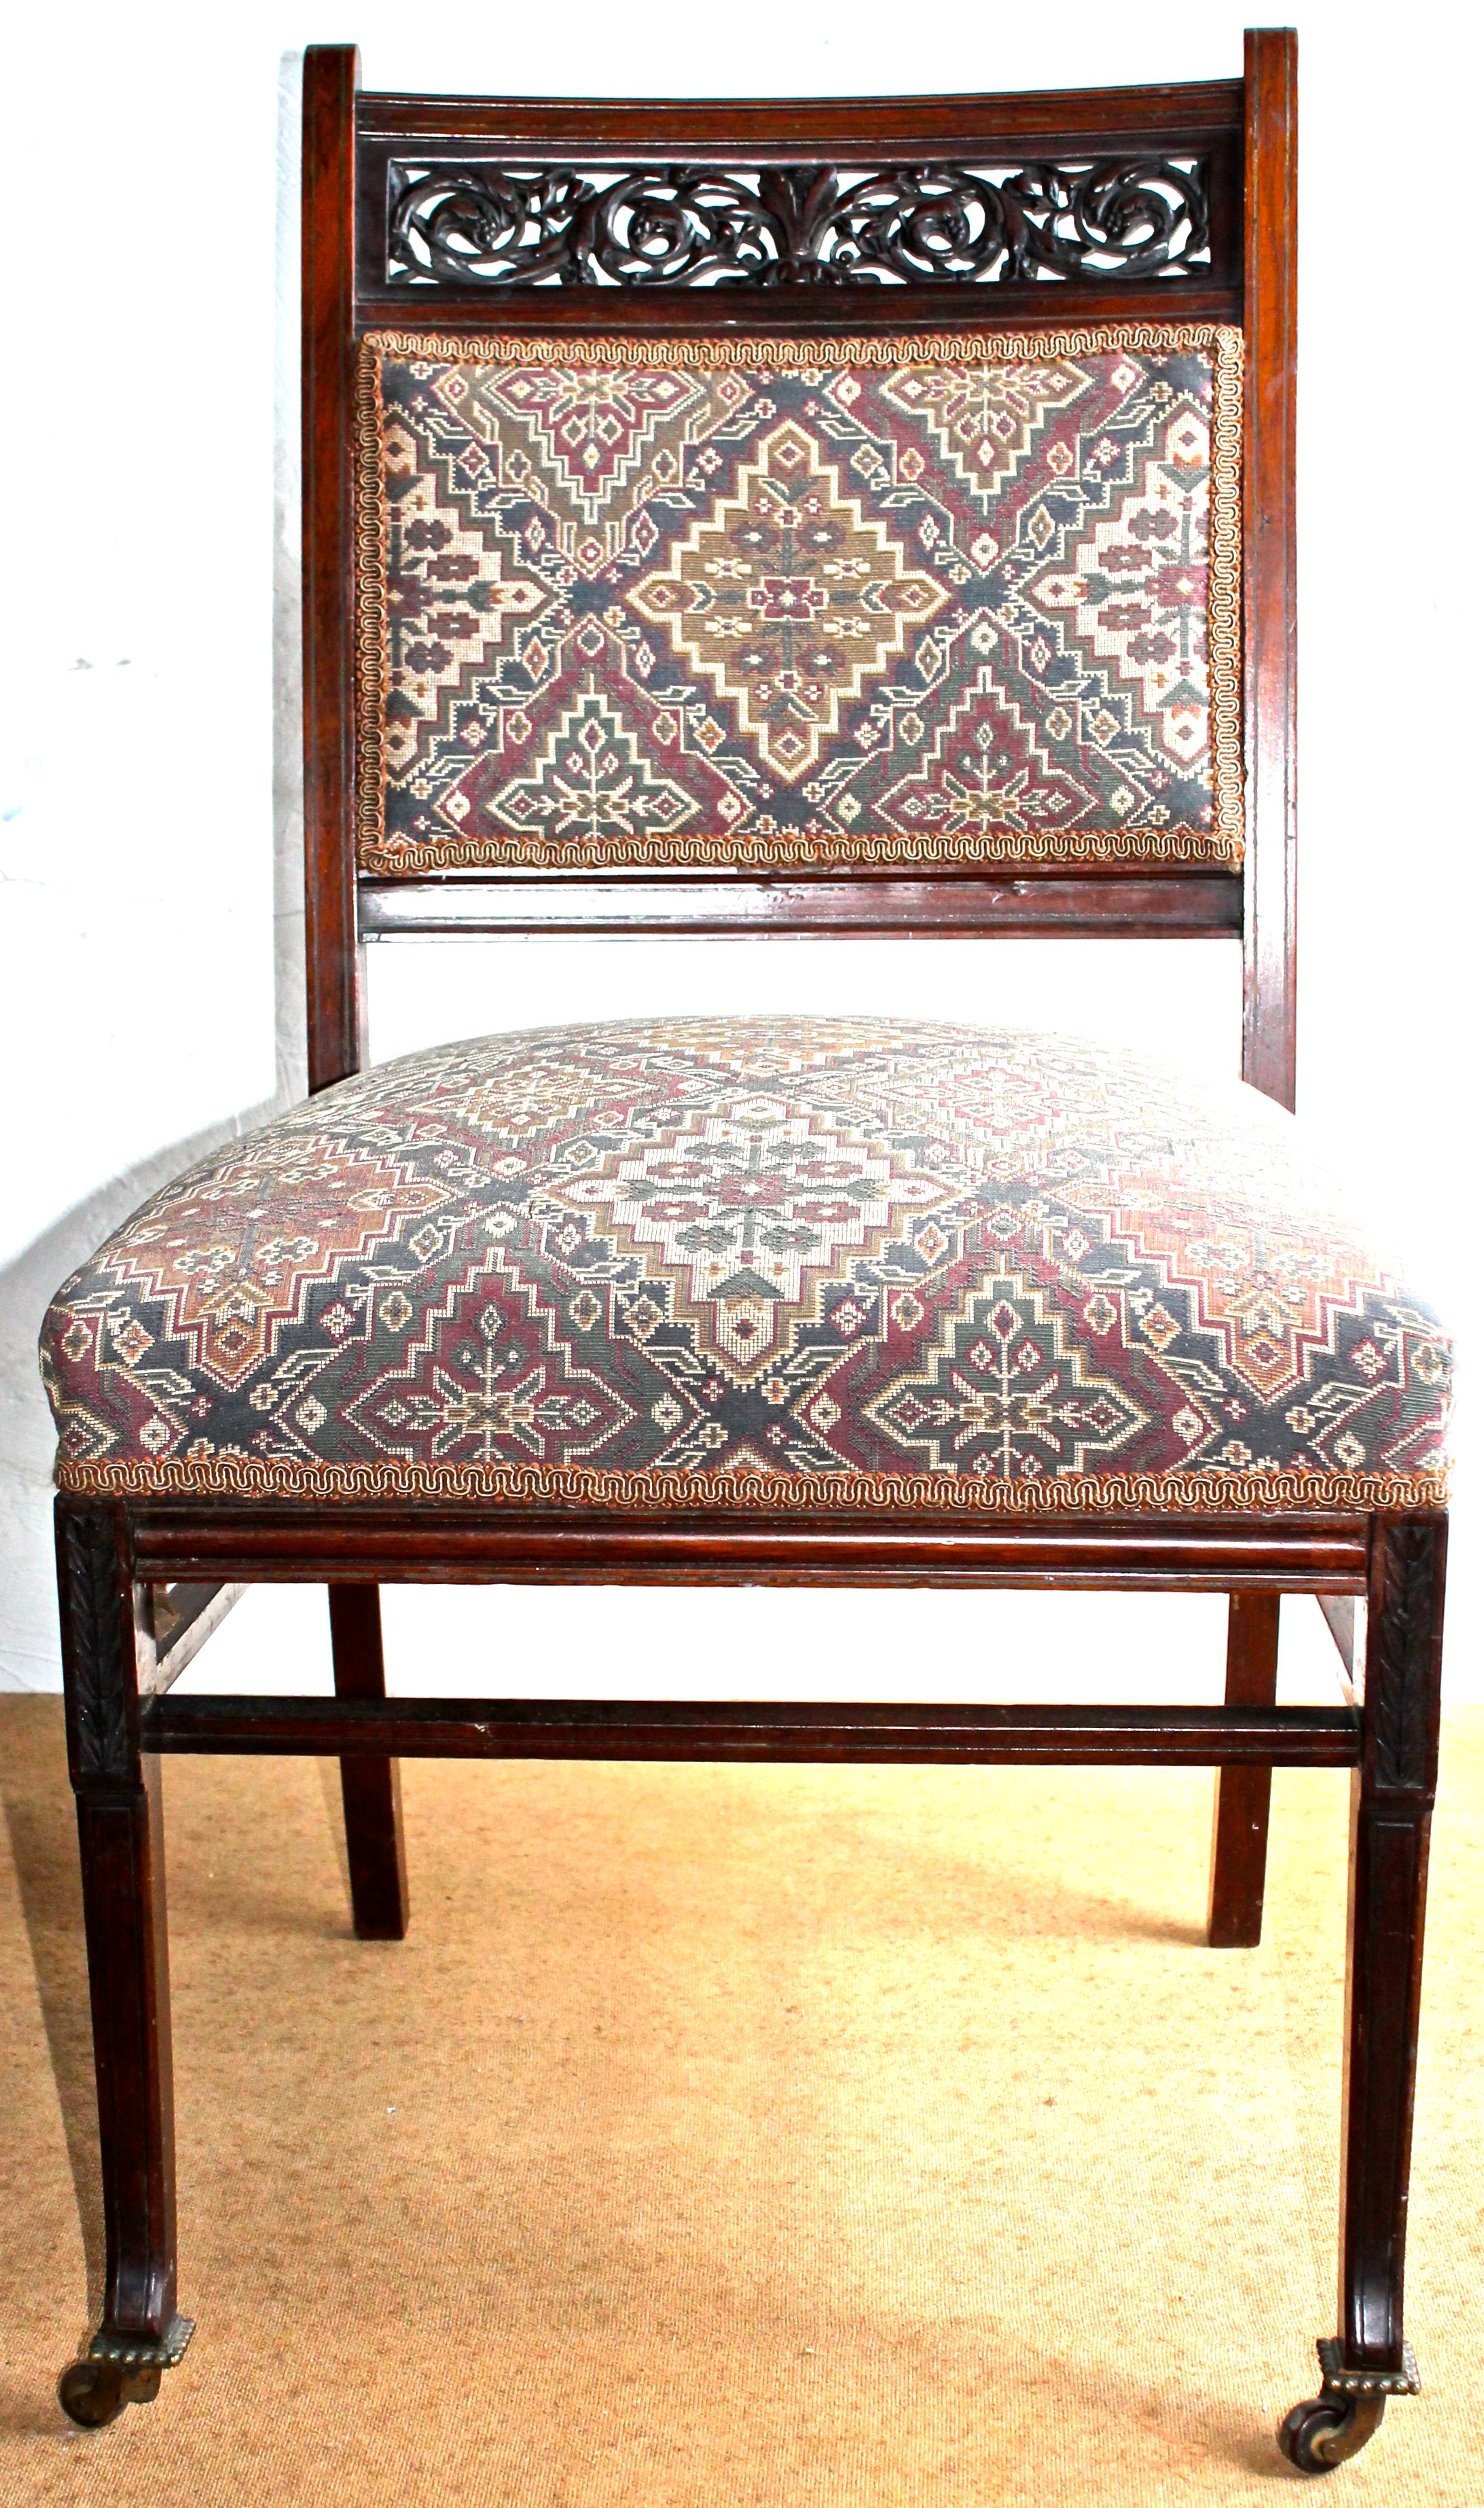 Important chair in fine woods with brass inlay and fine detailed carving on crest and front of legs. Chair's two front legs equipped with India Rubber Comb Co. New York Casters. Upholstery new, as found.